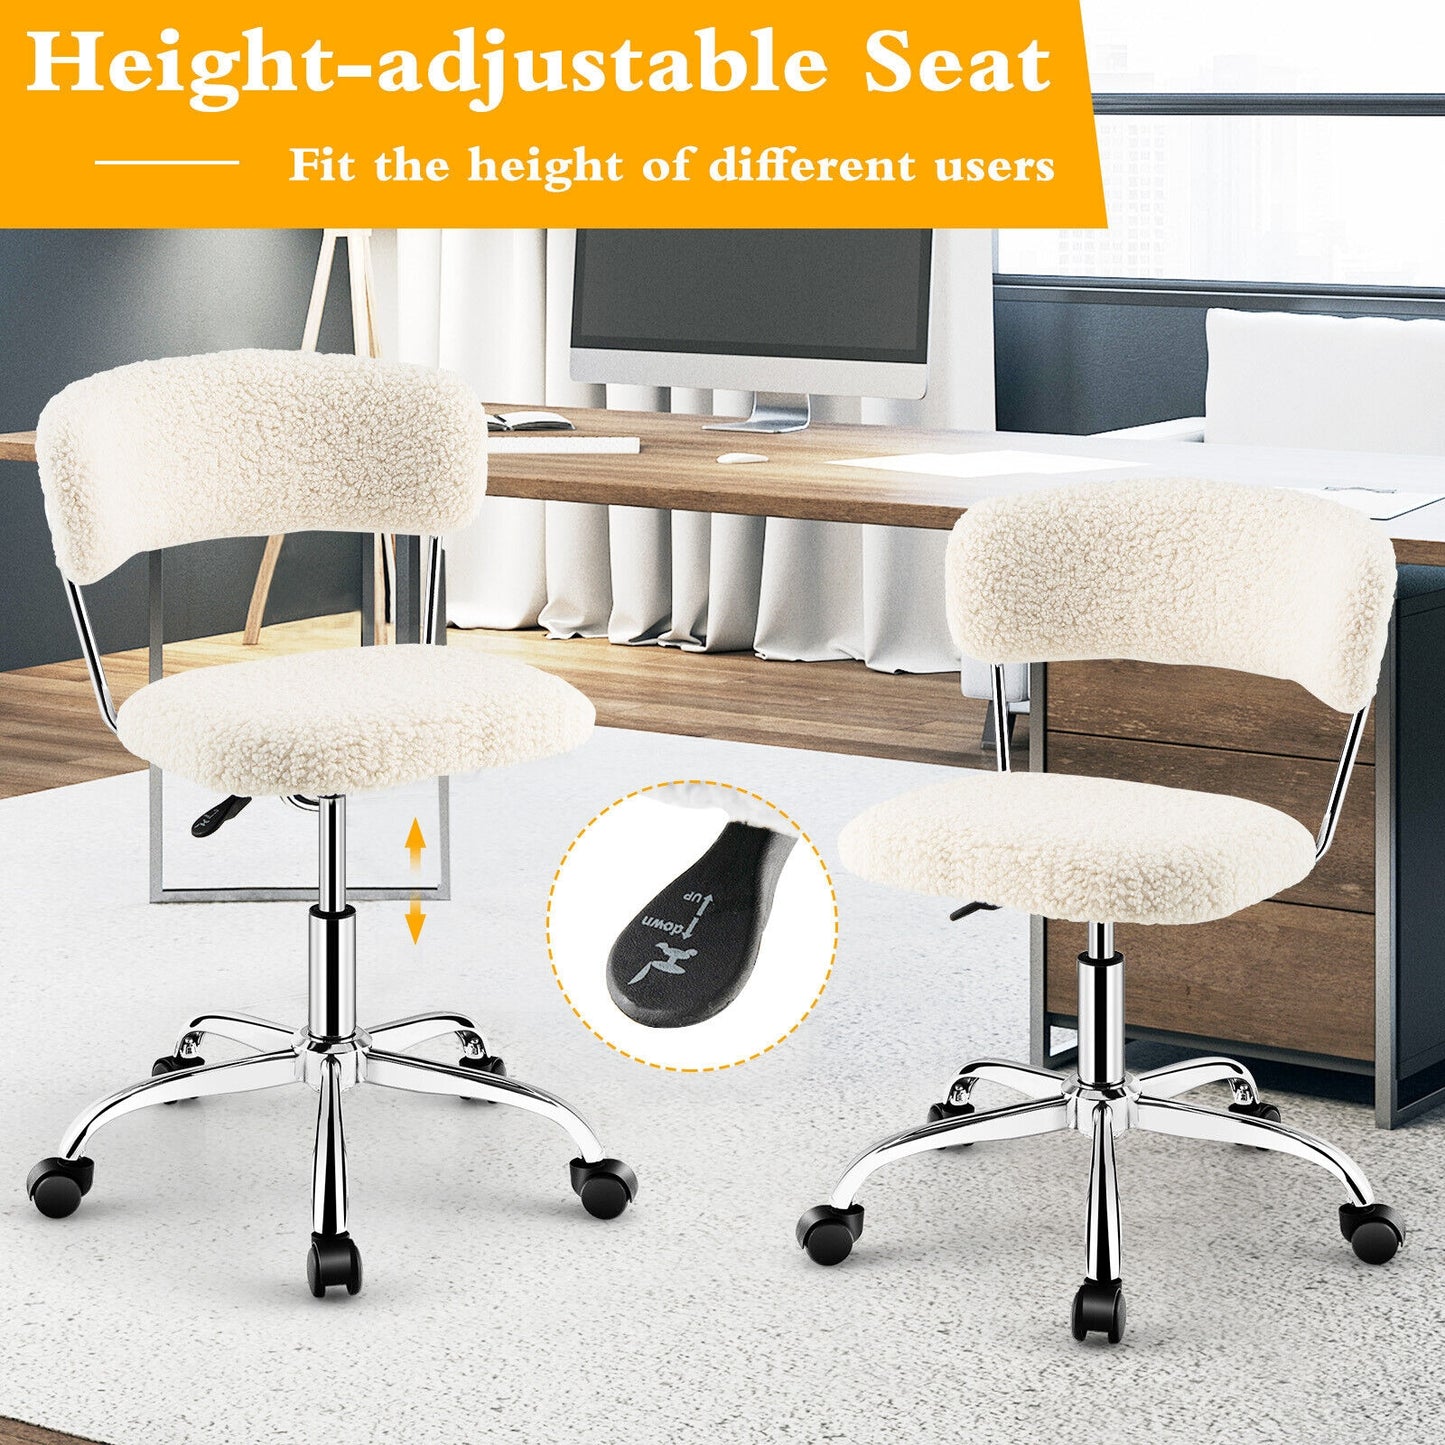 Computer Desk Chair Adjustable Sherpa Office Chair Swivel Vanity Chair-White